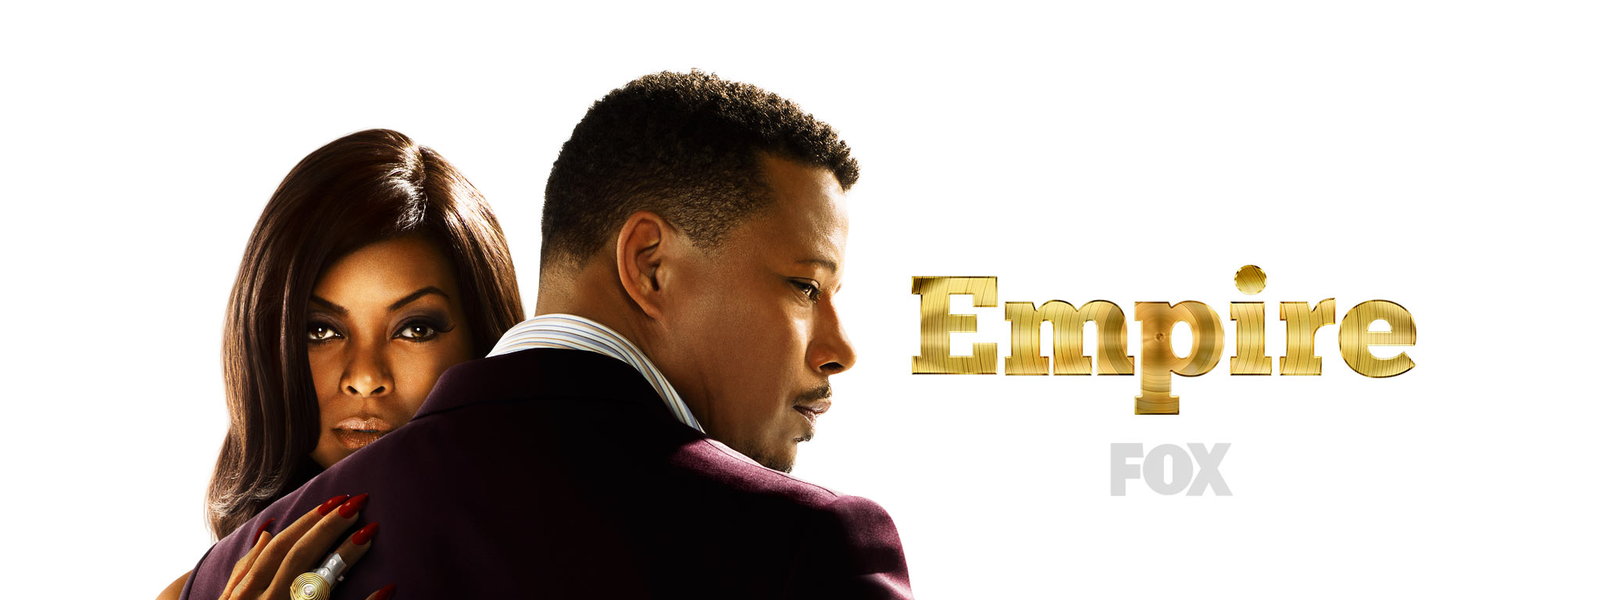 free download empire is on fox fox is one of the biggest television networks 1600x600 for your desktop mobile tablet explore 47 fox empire wallpaper empire tv show wallpaper biggest television networks 1600x600